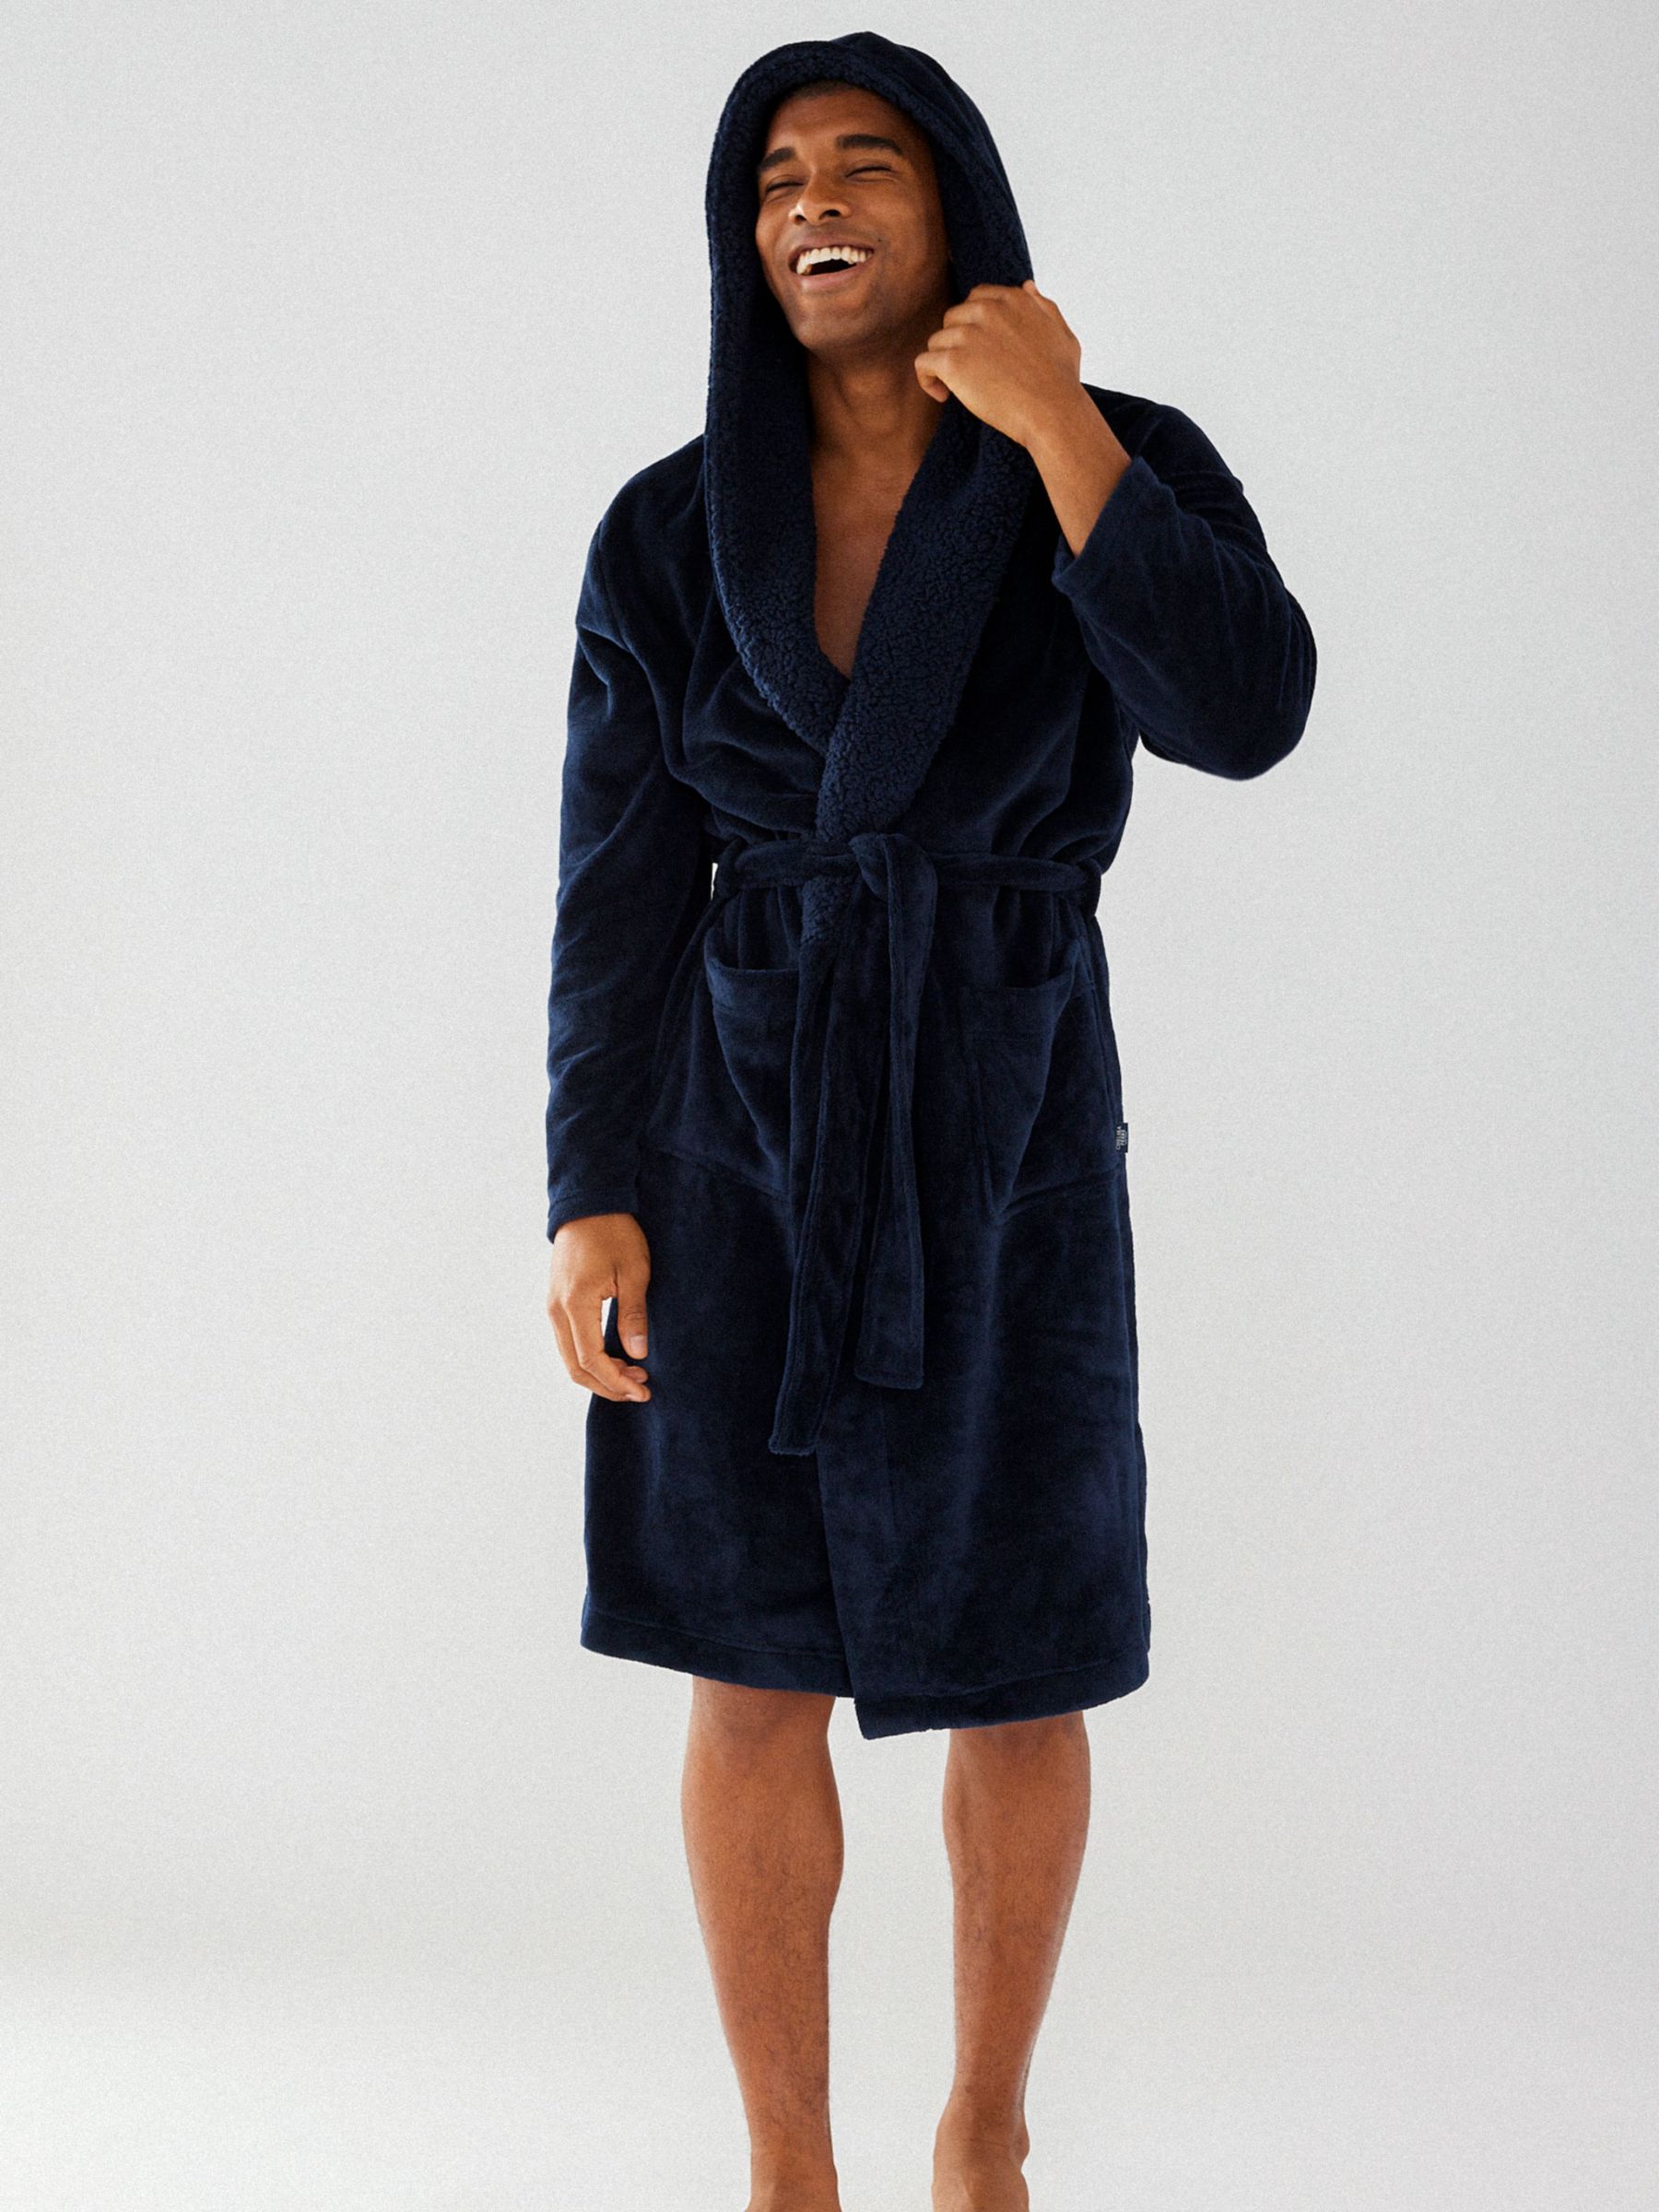 Chelsea Peers Fluffy Hooded Dressing Gown, Navy at John Lewis & Partners